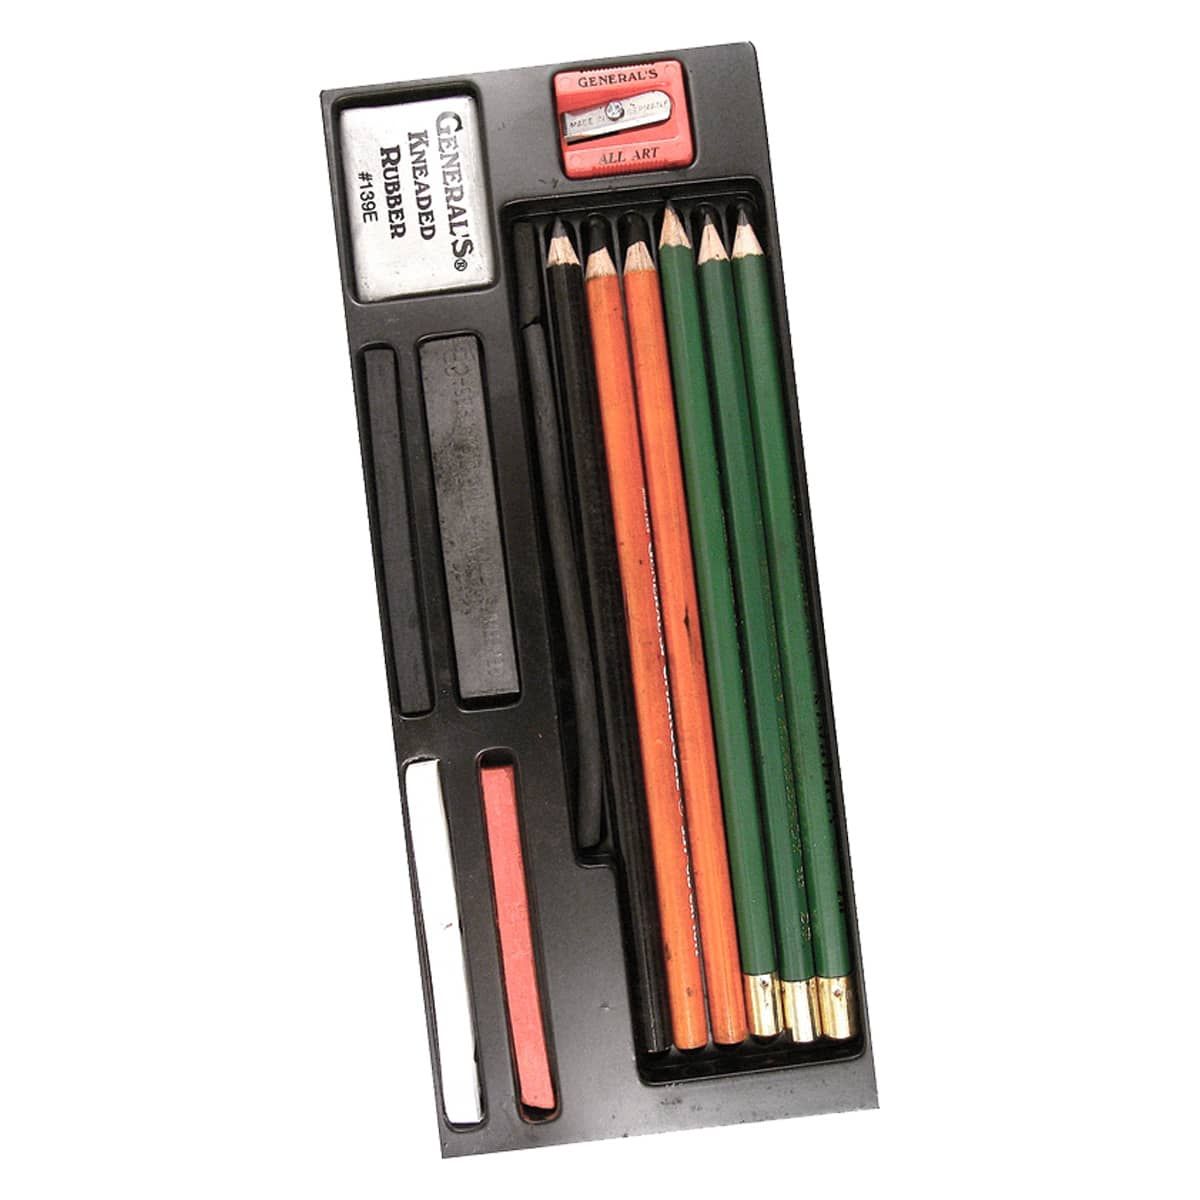 General's Drawing Class Essential Tools Kit #1